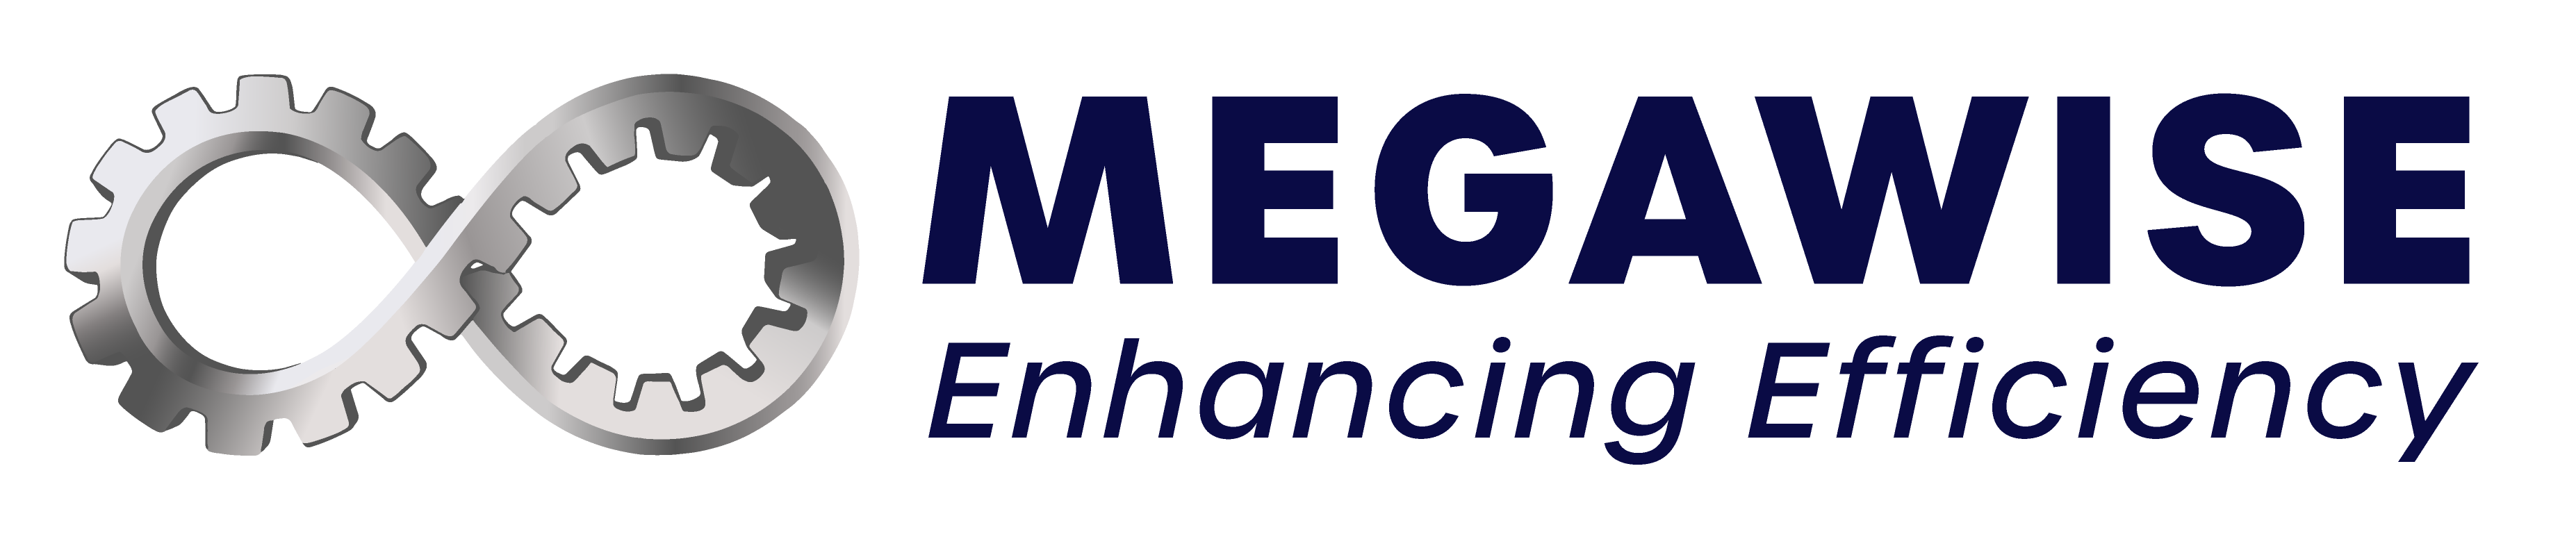 Megawise Industrial Gearboxes and Motors